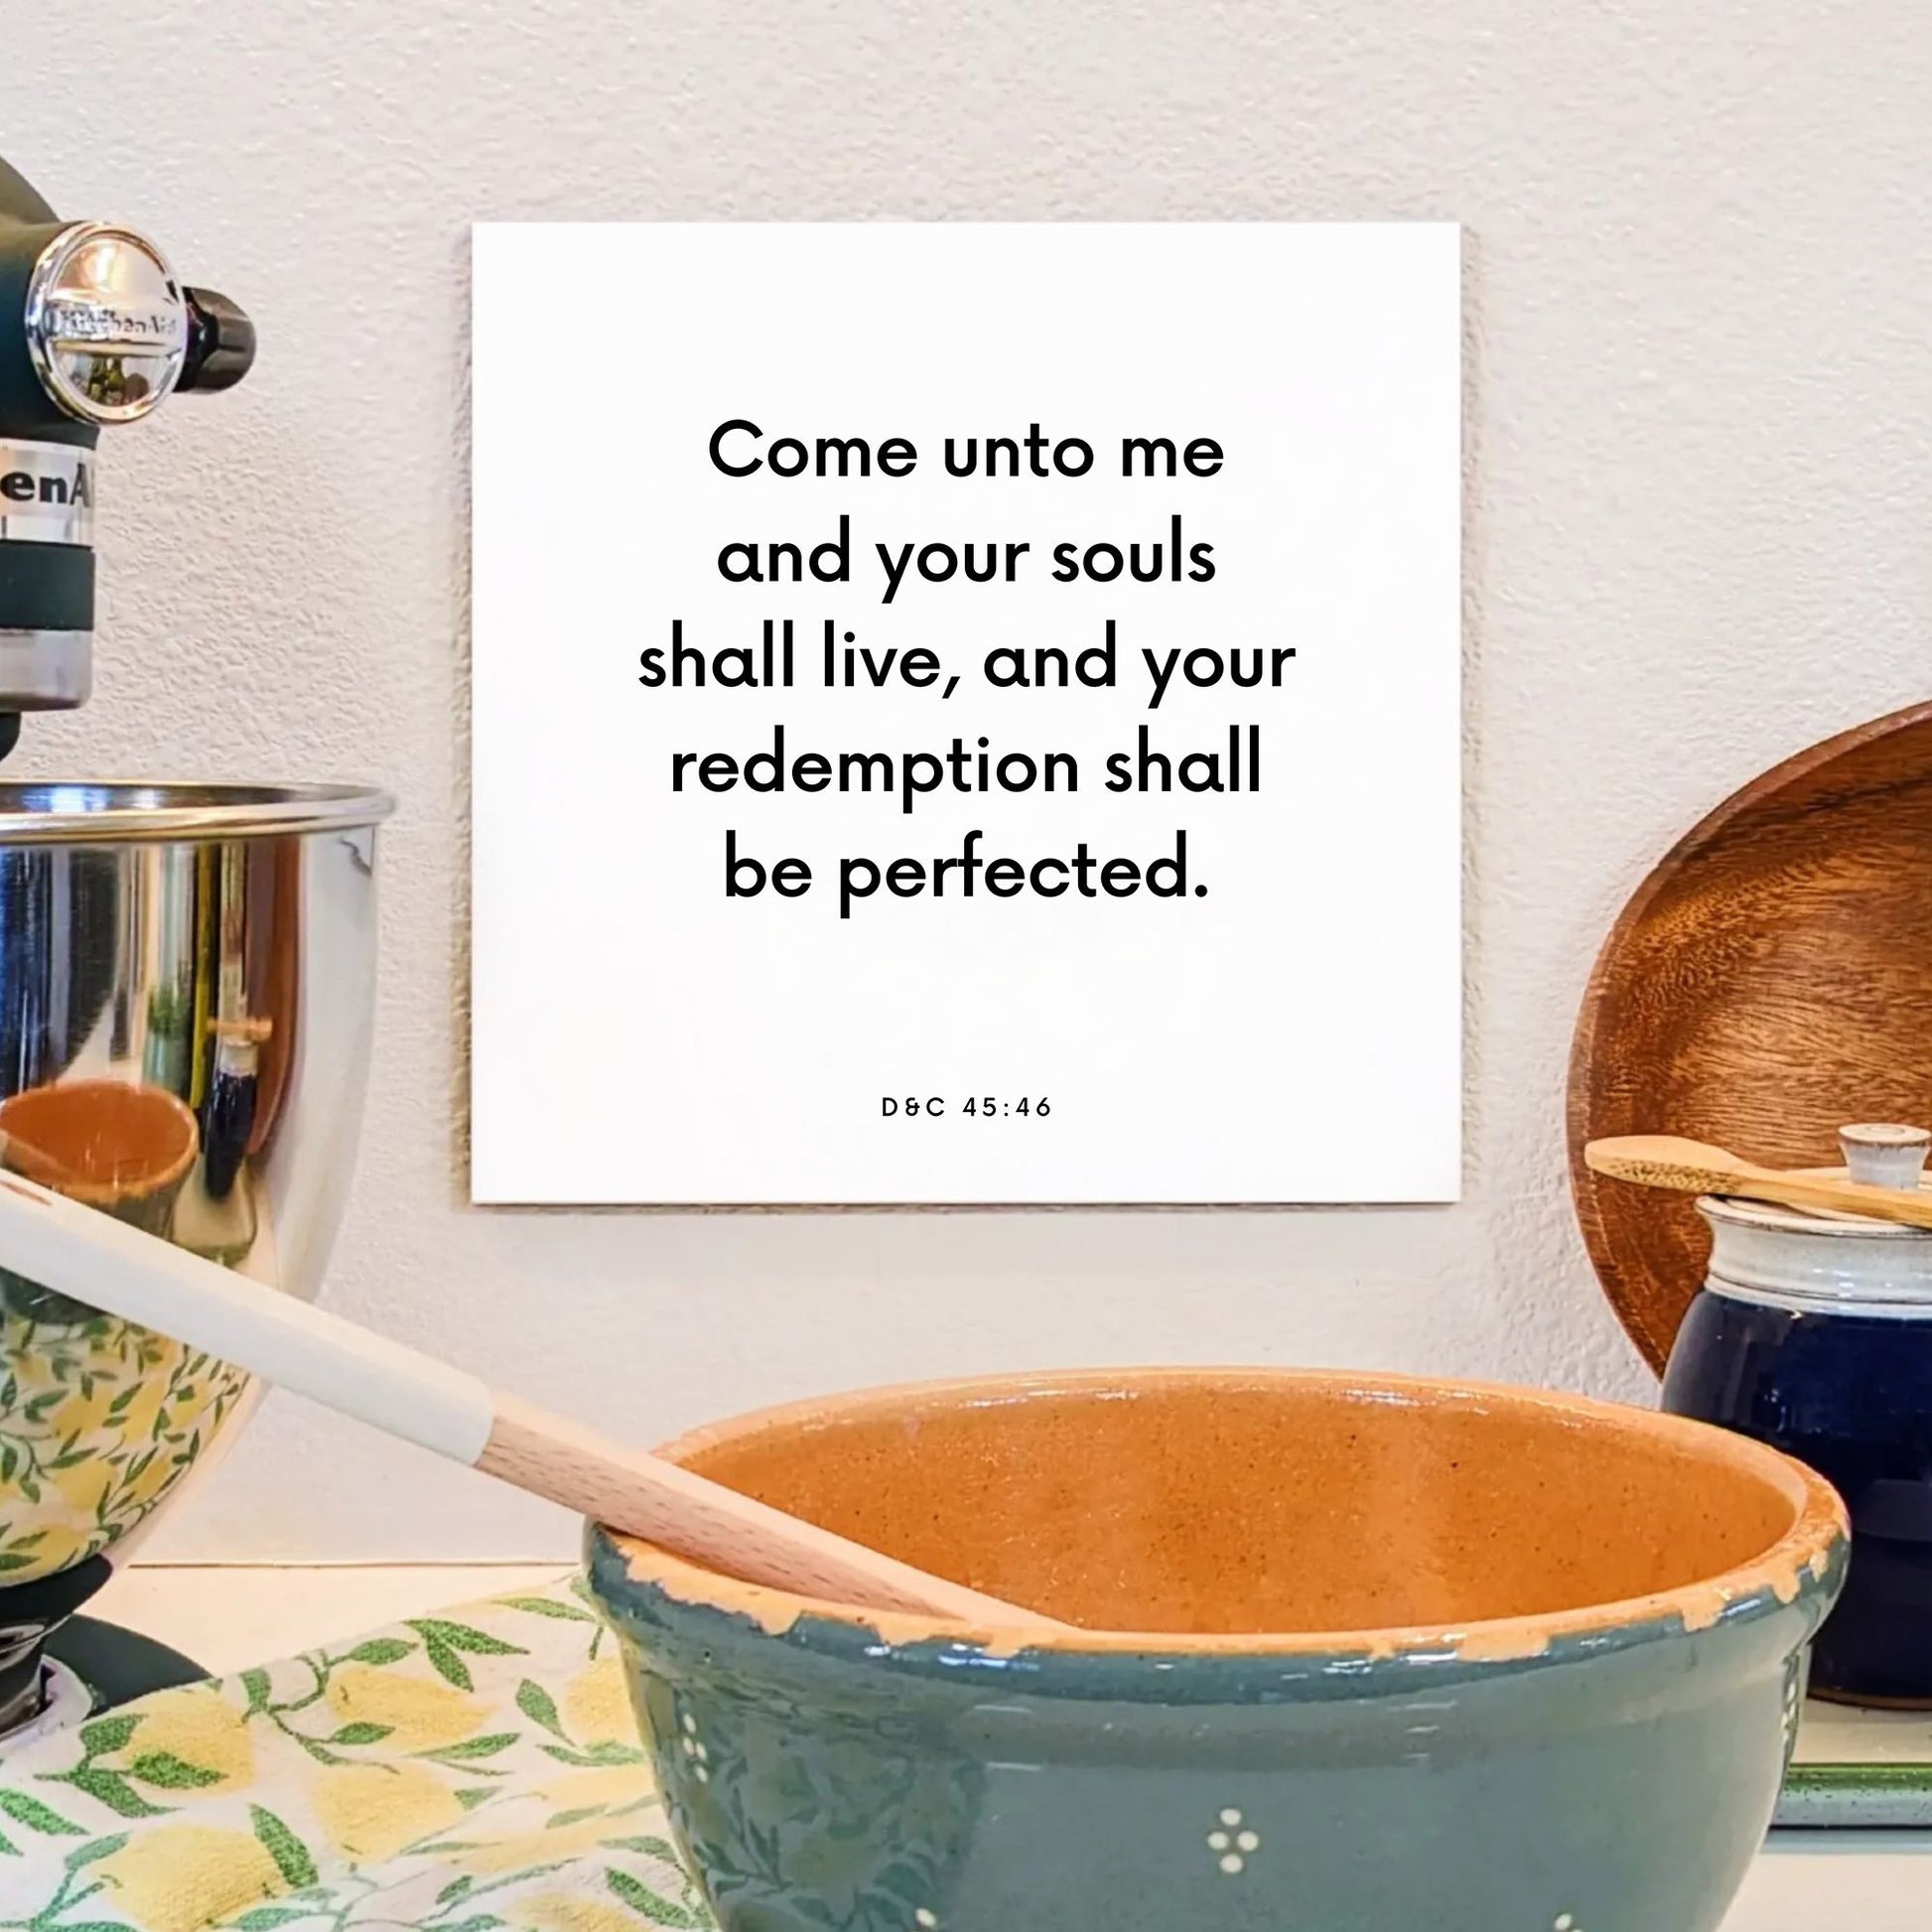 Kitchen mouting of the scripture tile for D&C 45:46 - "Come unto me and your souls shall live"